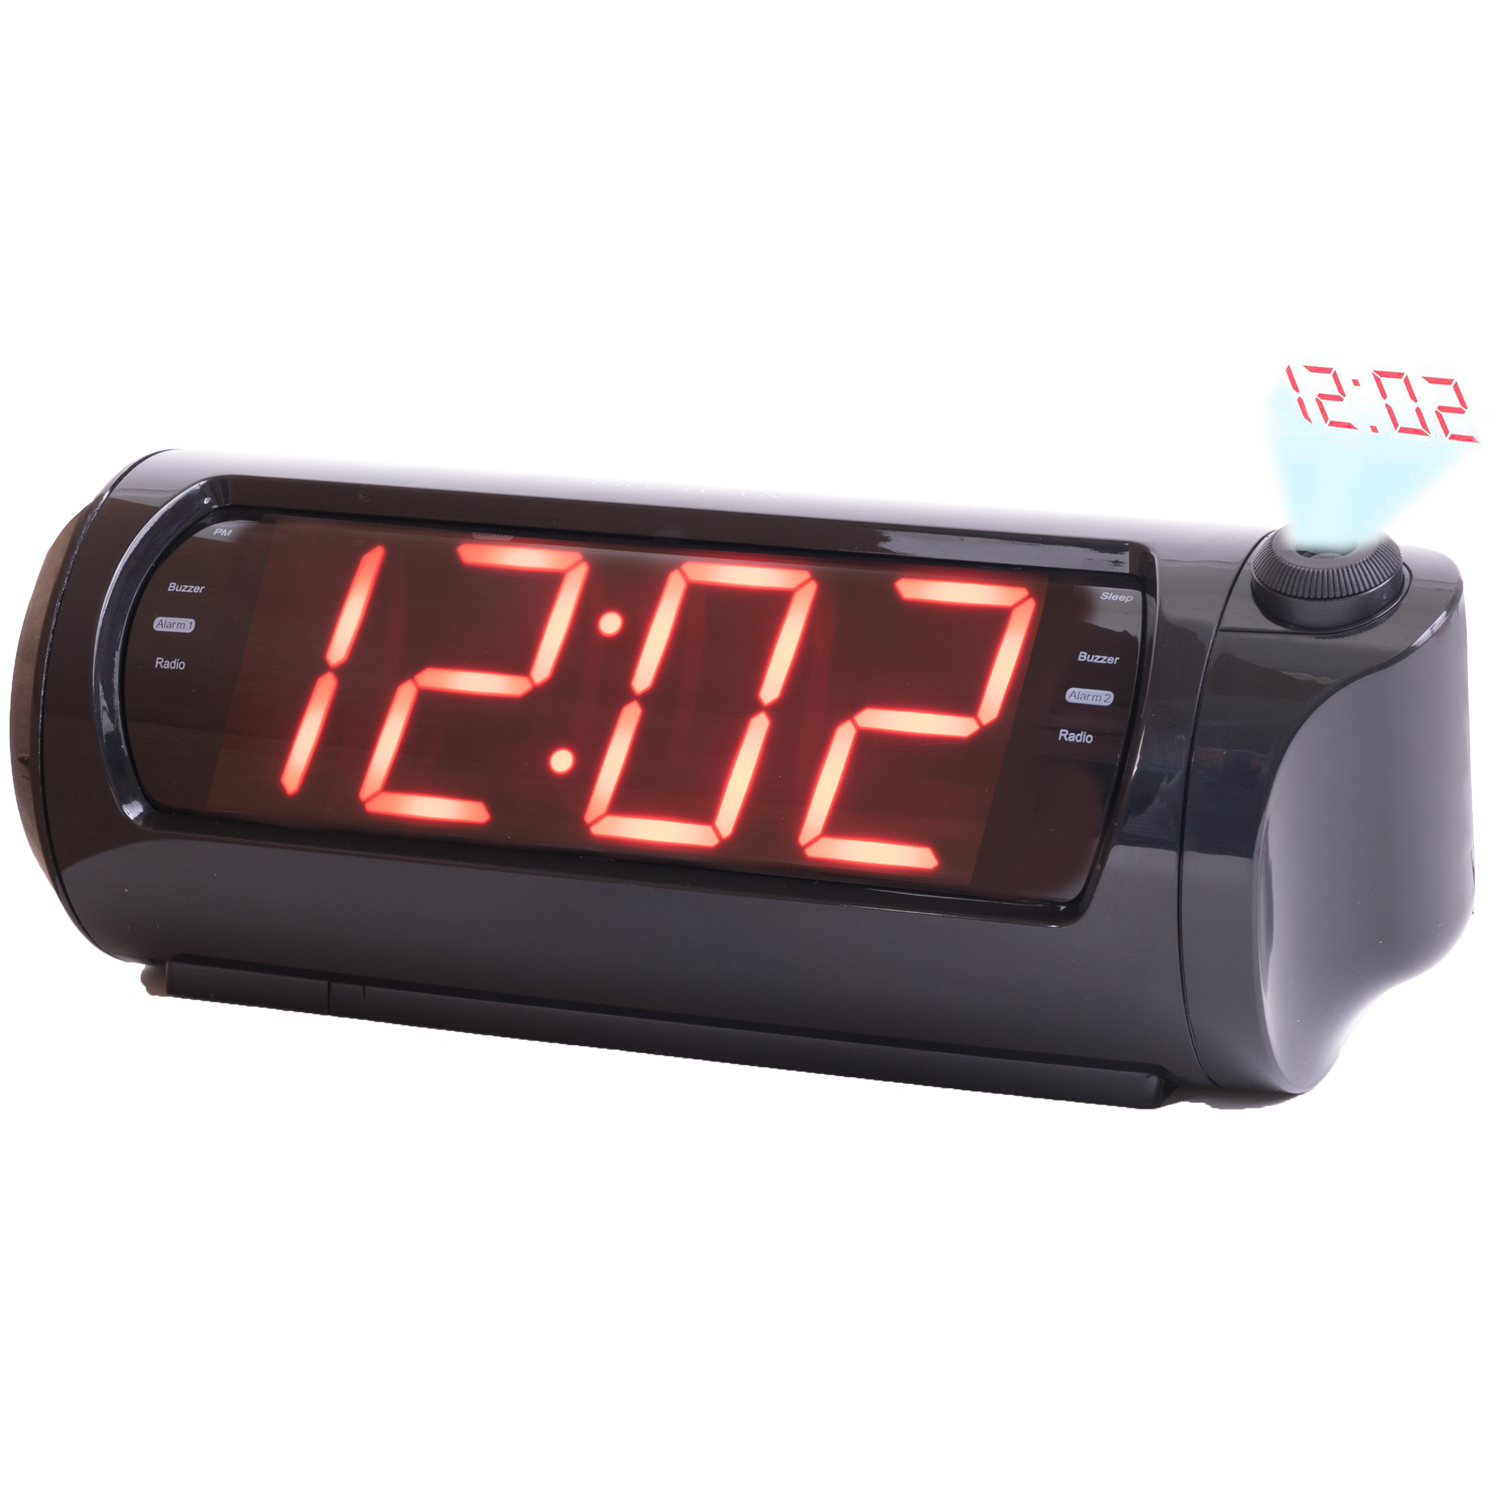 Proscan - Time projection dual alarm clock radio with USB charging ...